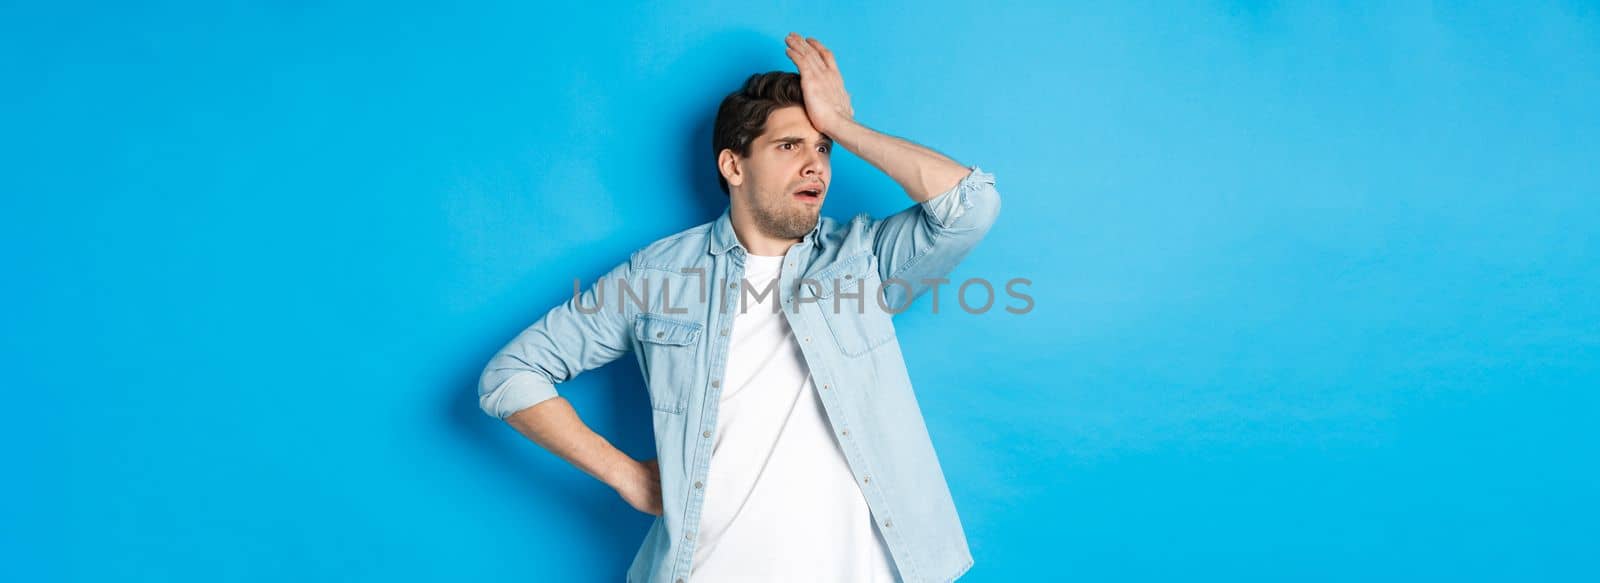 Upset man making facepalm and looking away concerned, forgot something important, slap forehead troubled, standing against blue background.